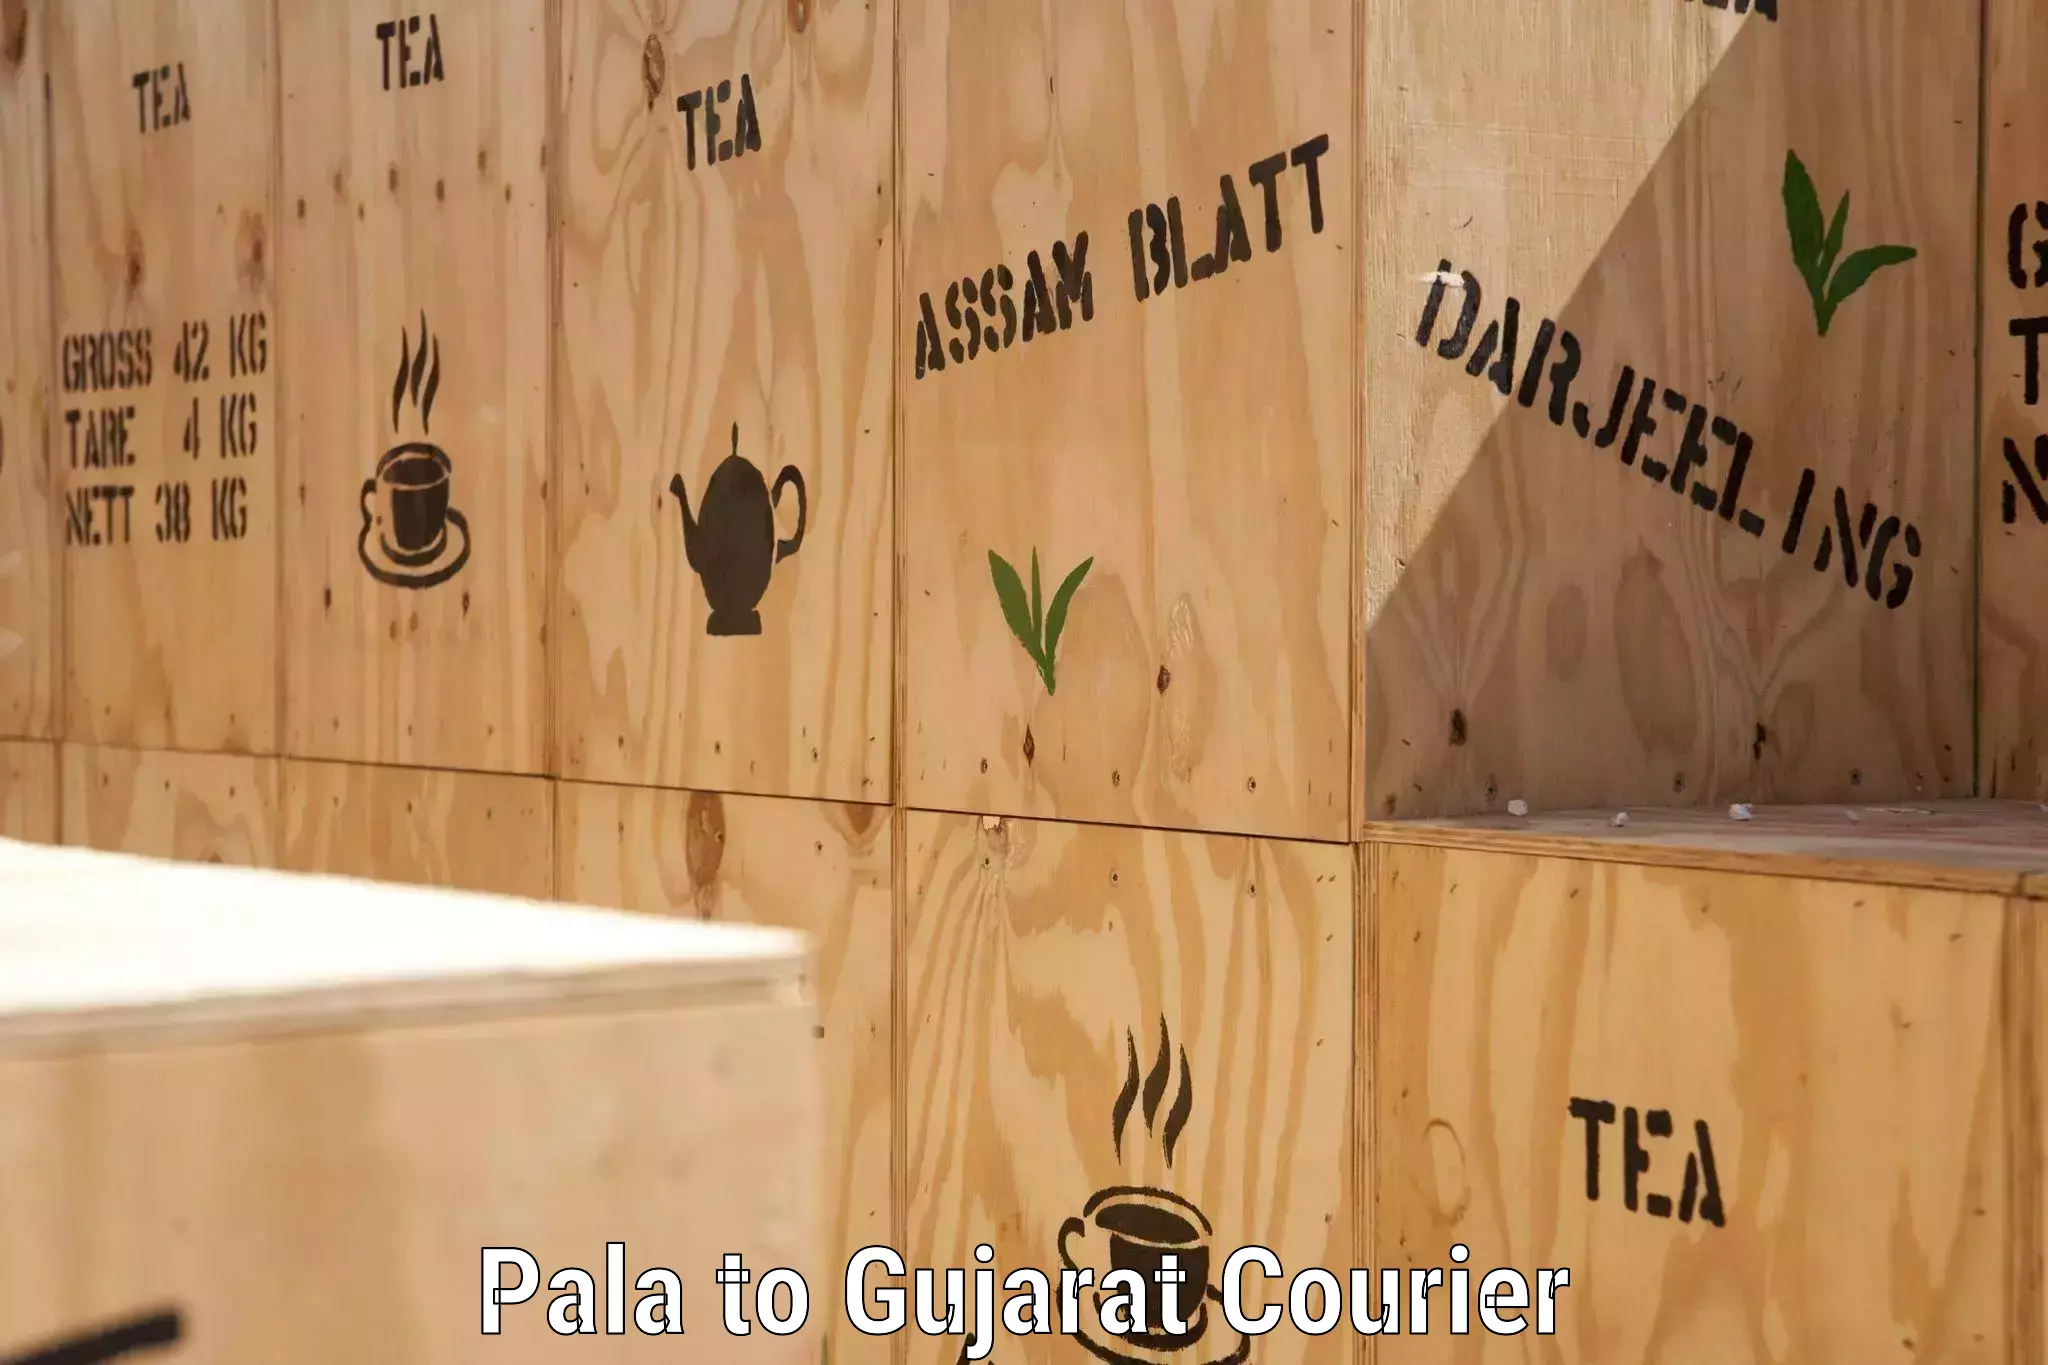 Global courier networks Pala to Gujarat